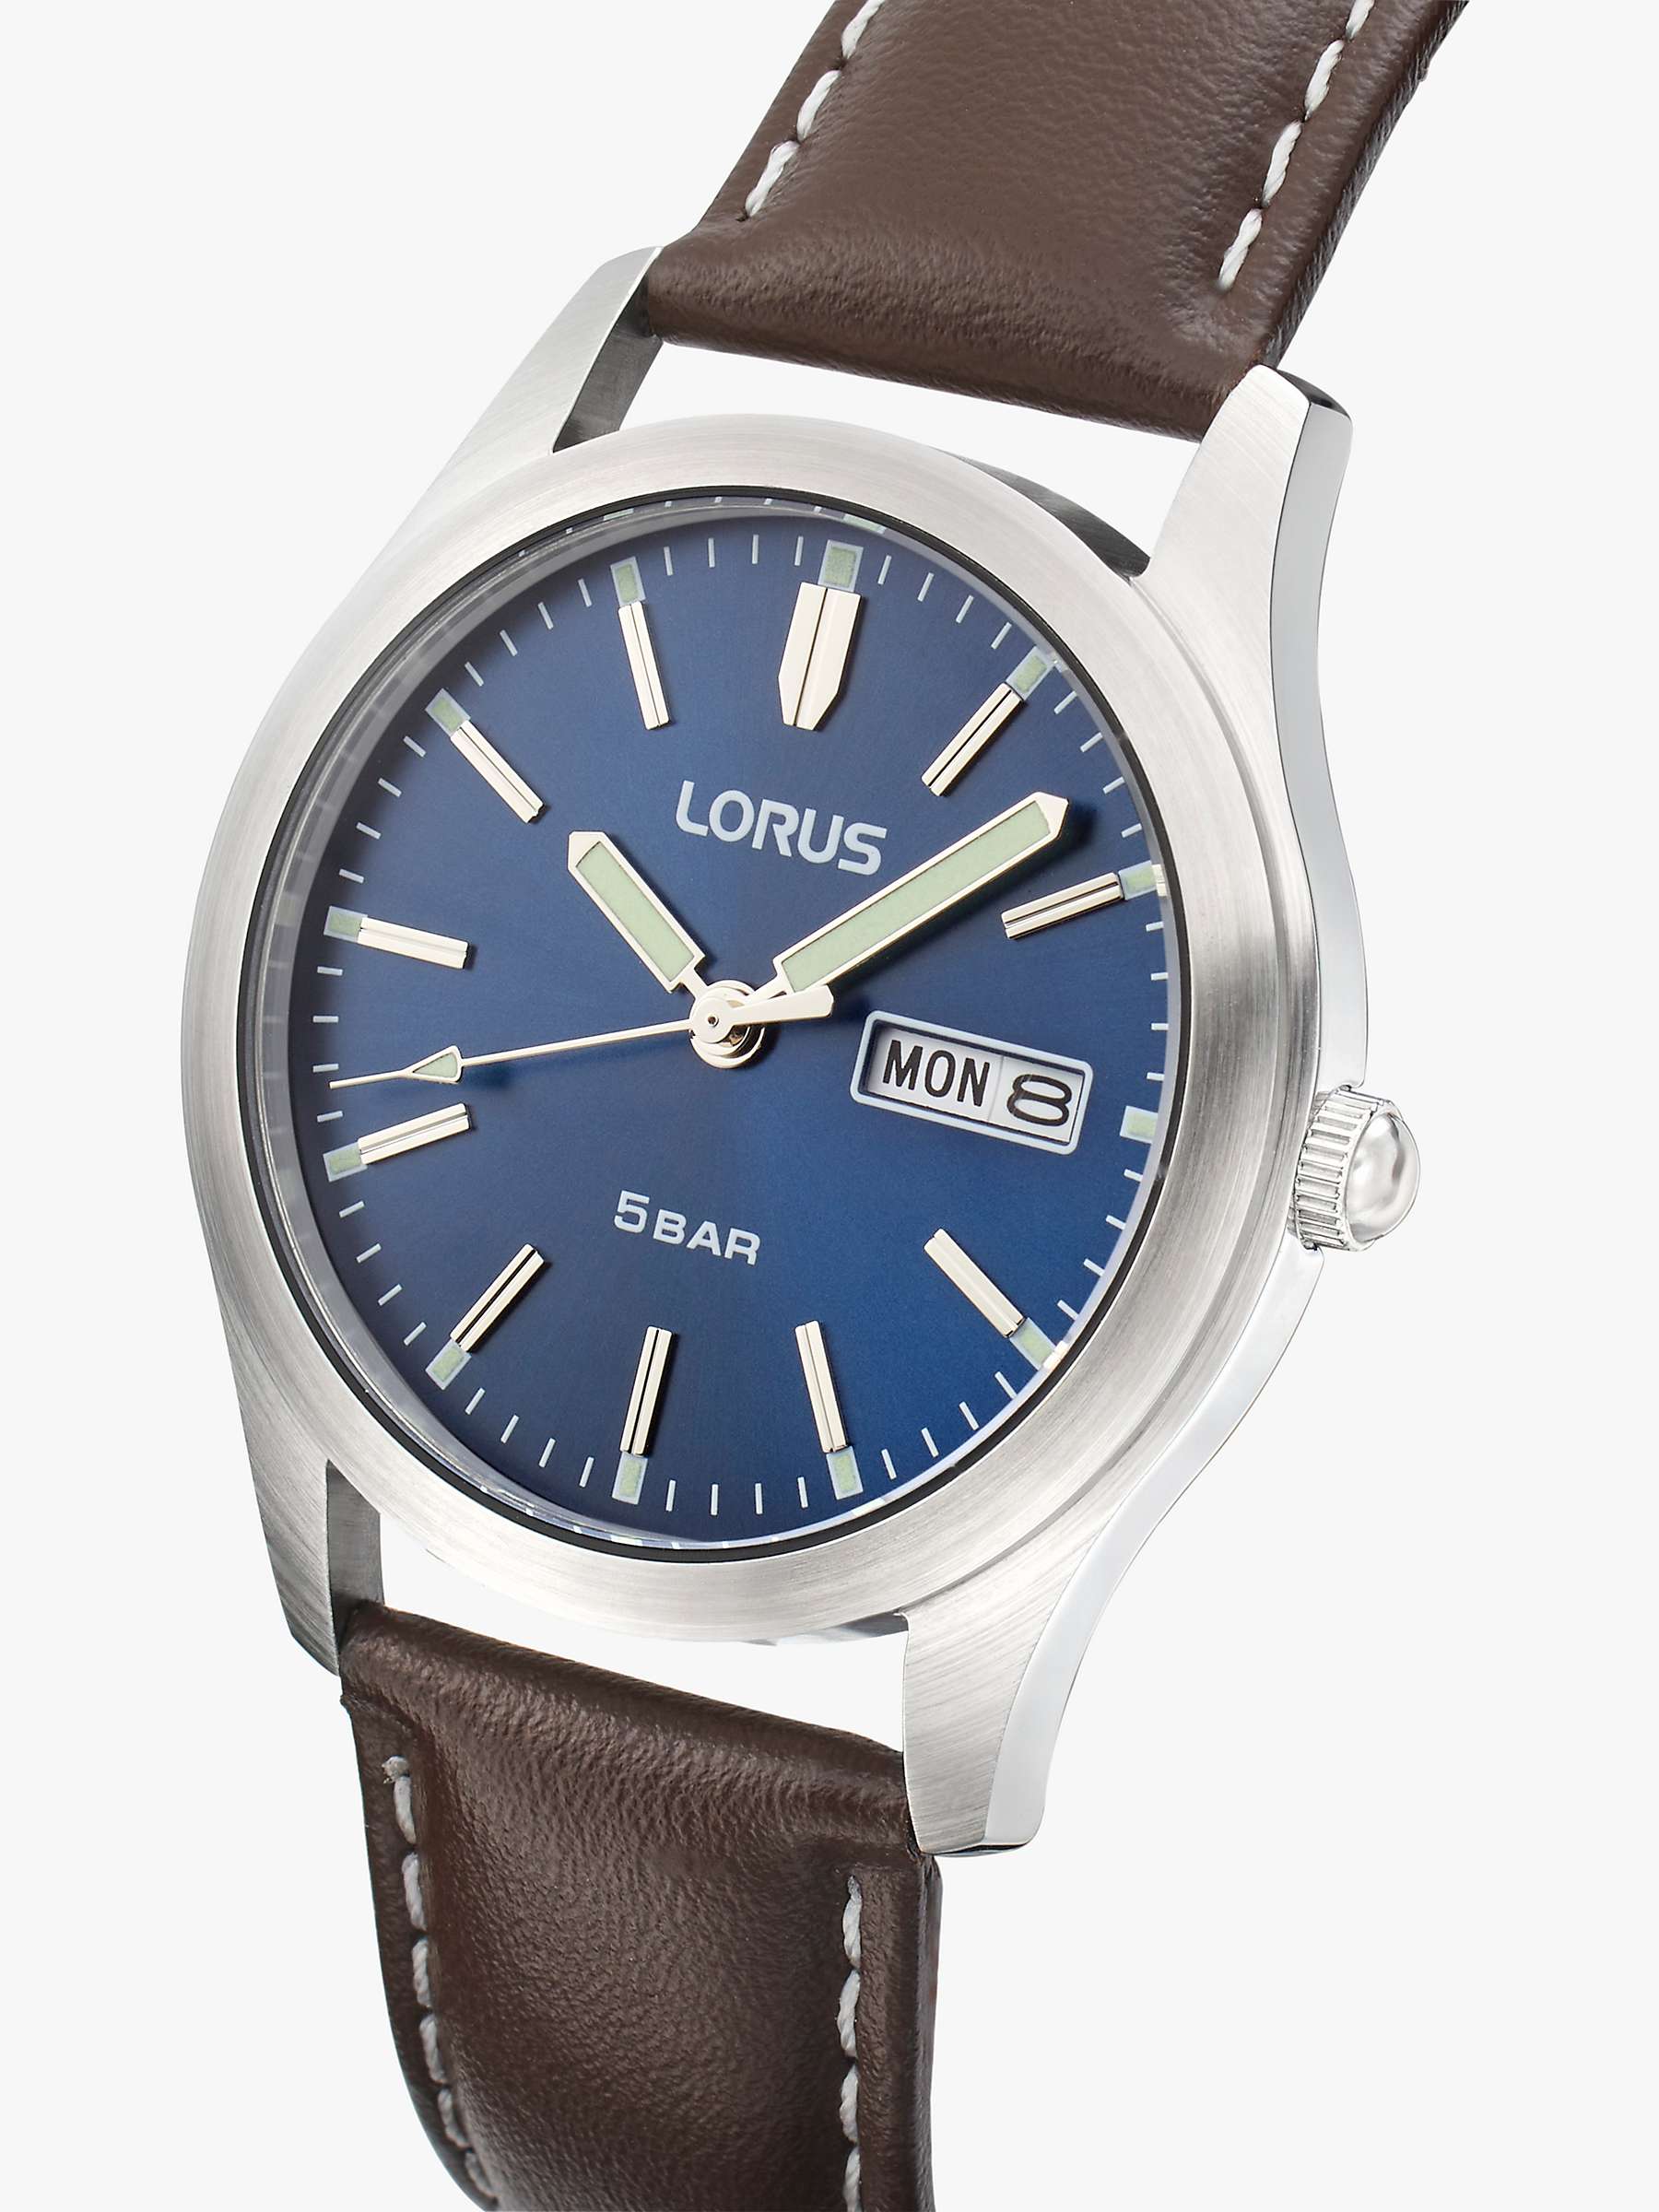 Buy Lorus RXN81DX9 Men's Classic Day Date Leather Strap Watch, Brown/Blue Online at johnlewis.com